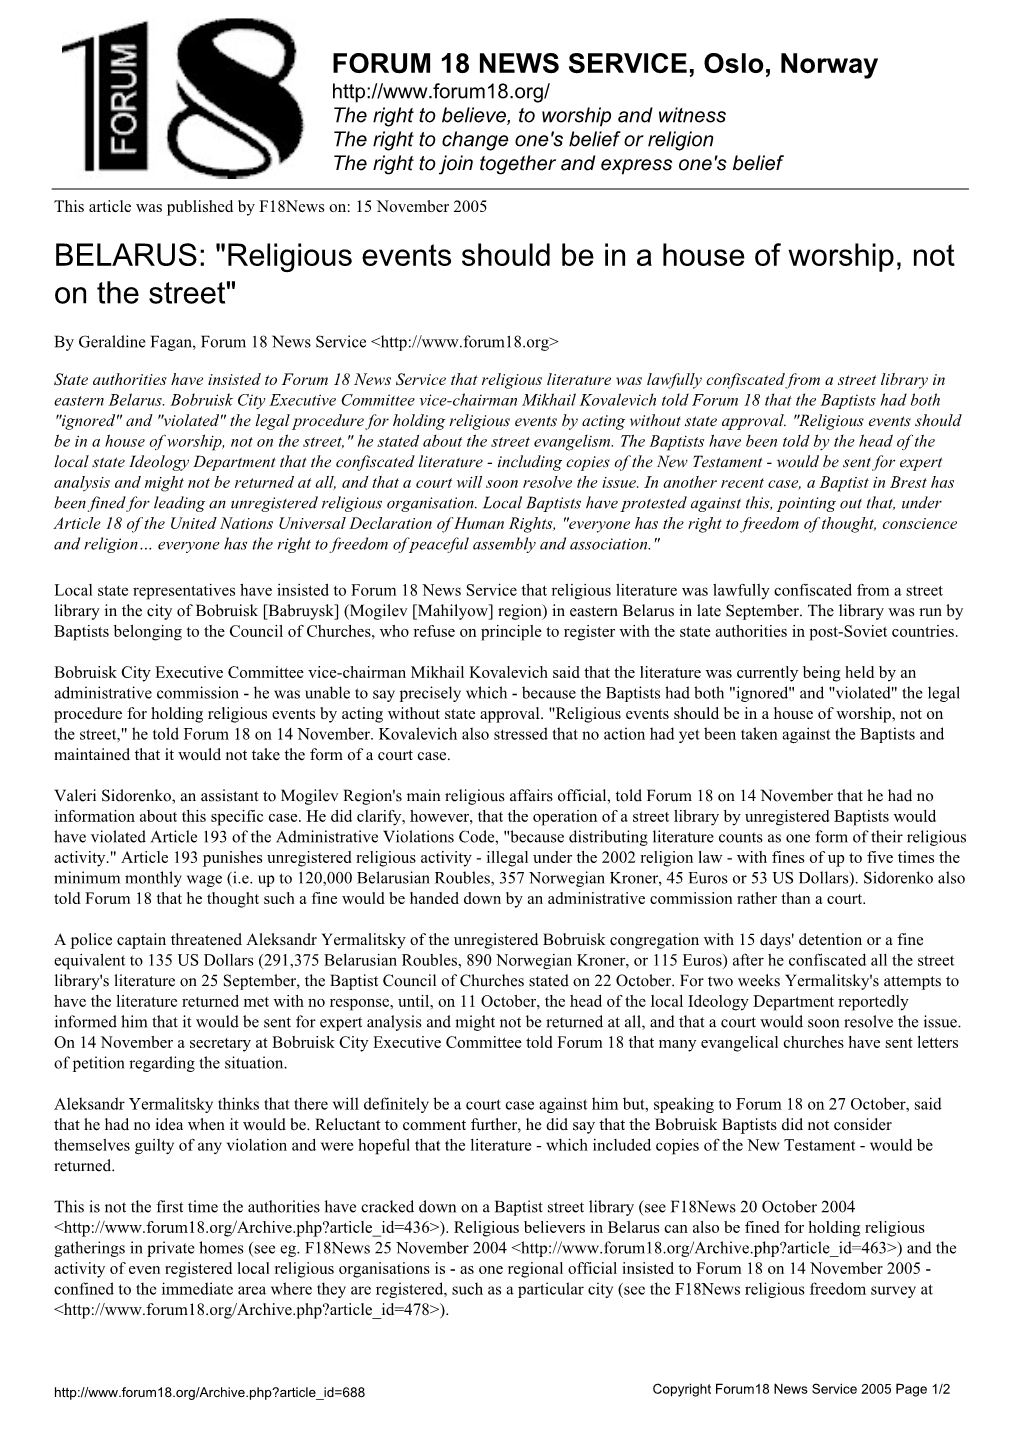 Religious Events Should Be in a House of Worship, Not on the Street"